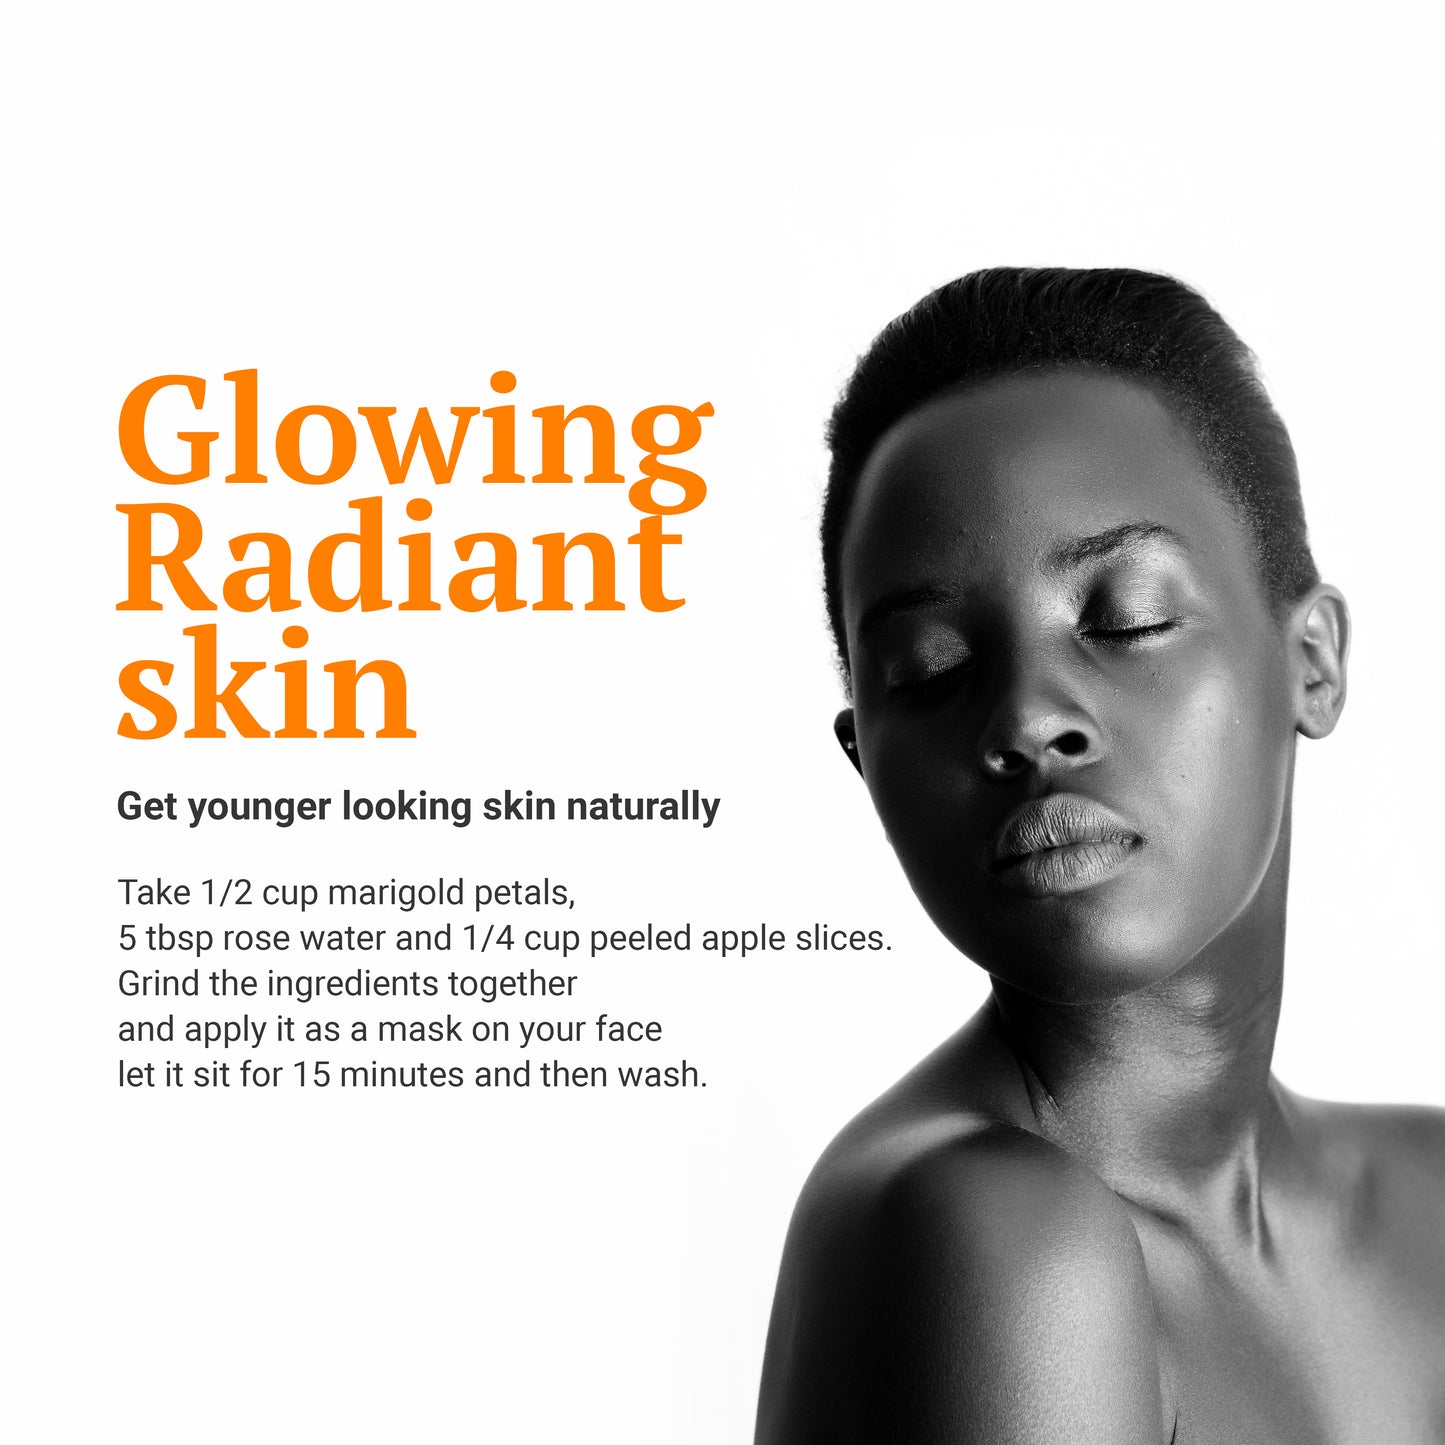 
                  
                    Glowing radiant skin  Get younger looking skin naturally take 1/2 cup marigold petals, tbsp rose water and 1/4 cup peeled apple slices. Grind the ingredients together and apply it as a mask on your face let it sit for 15 minutes and then wash - Dried Calendula (Marigold) Flowers promotes skin glowing
                  
                